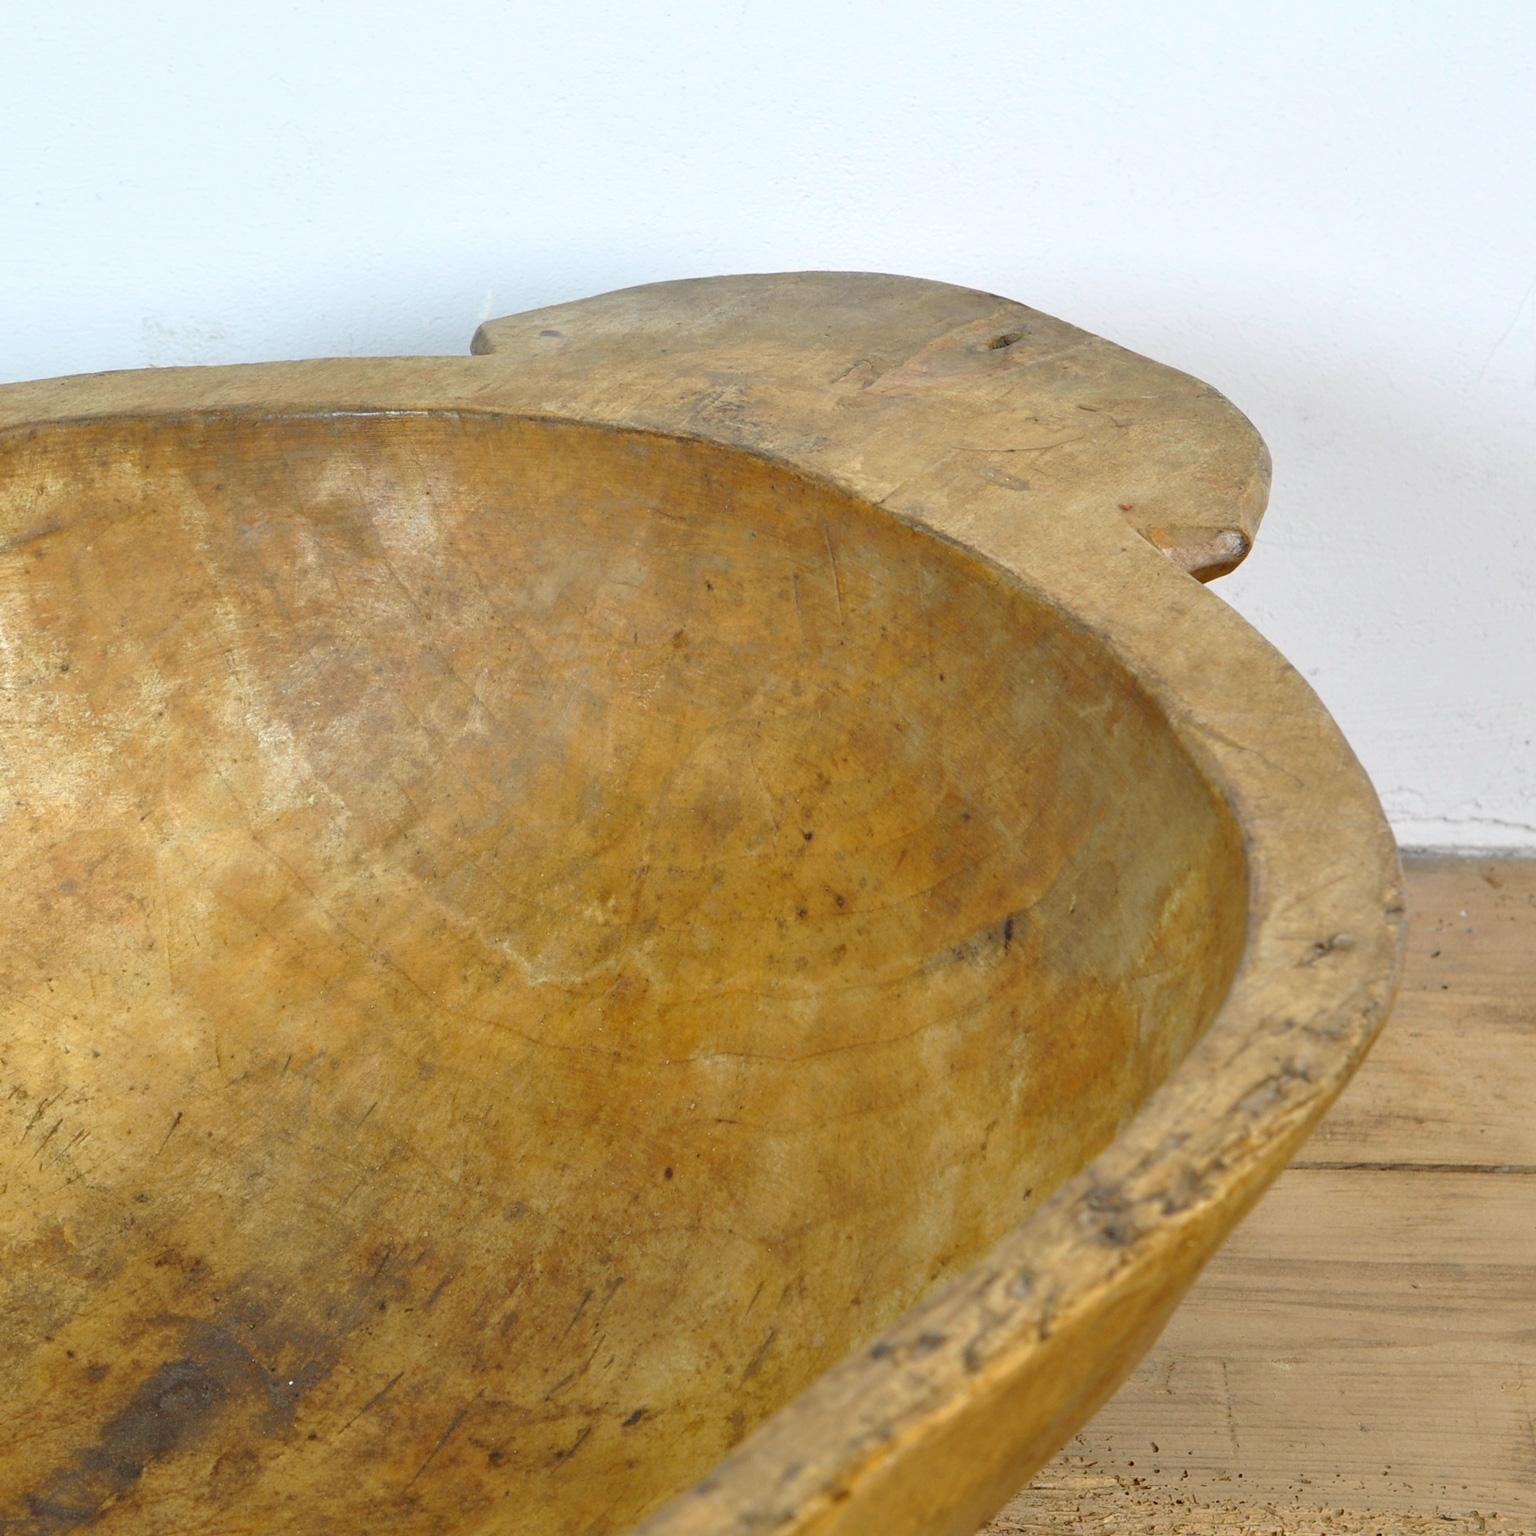 Rustic Handmade Wooden Dough Bowl, Early 1900s